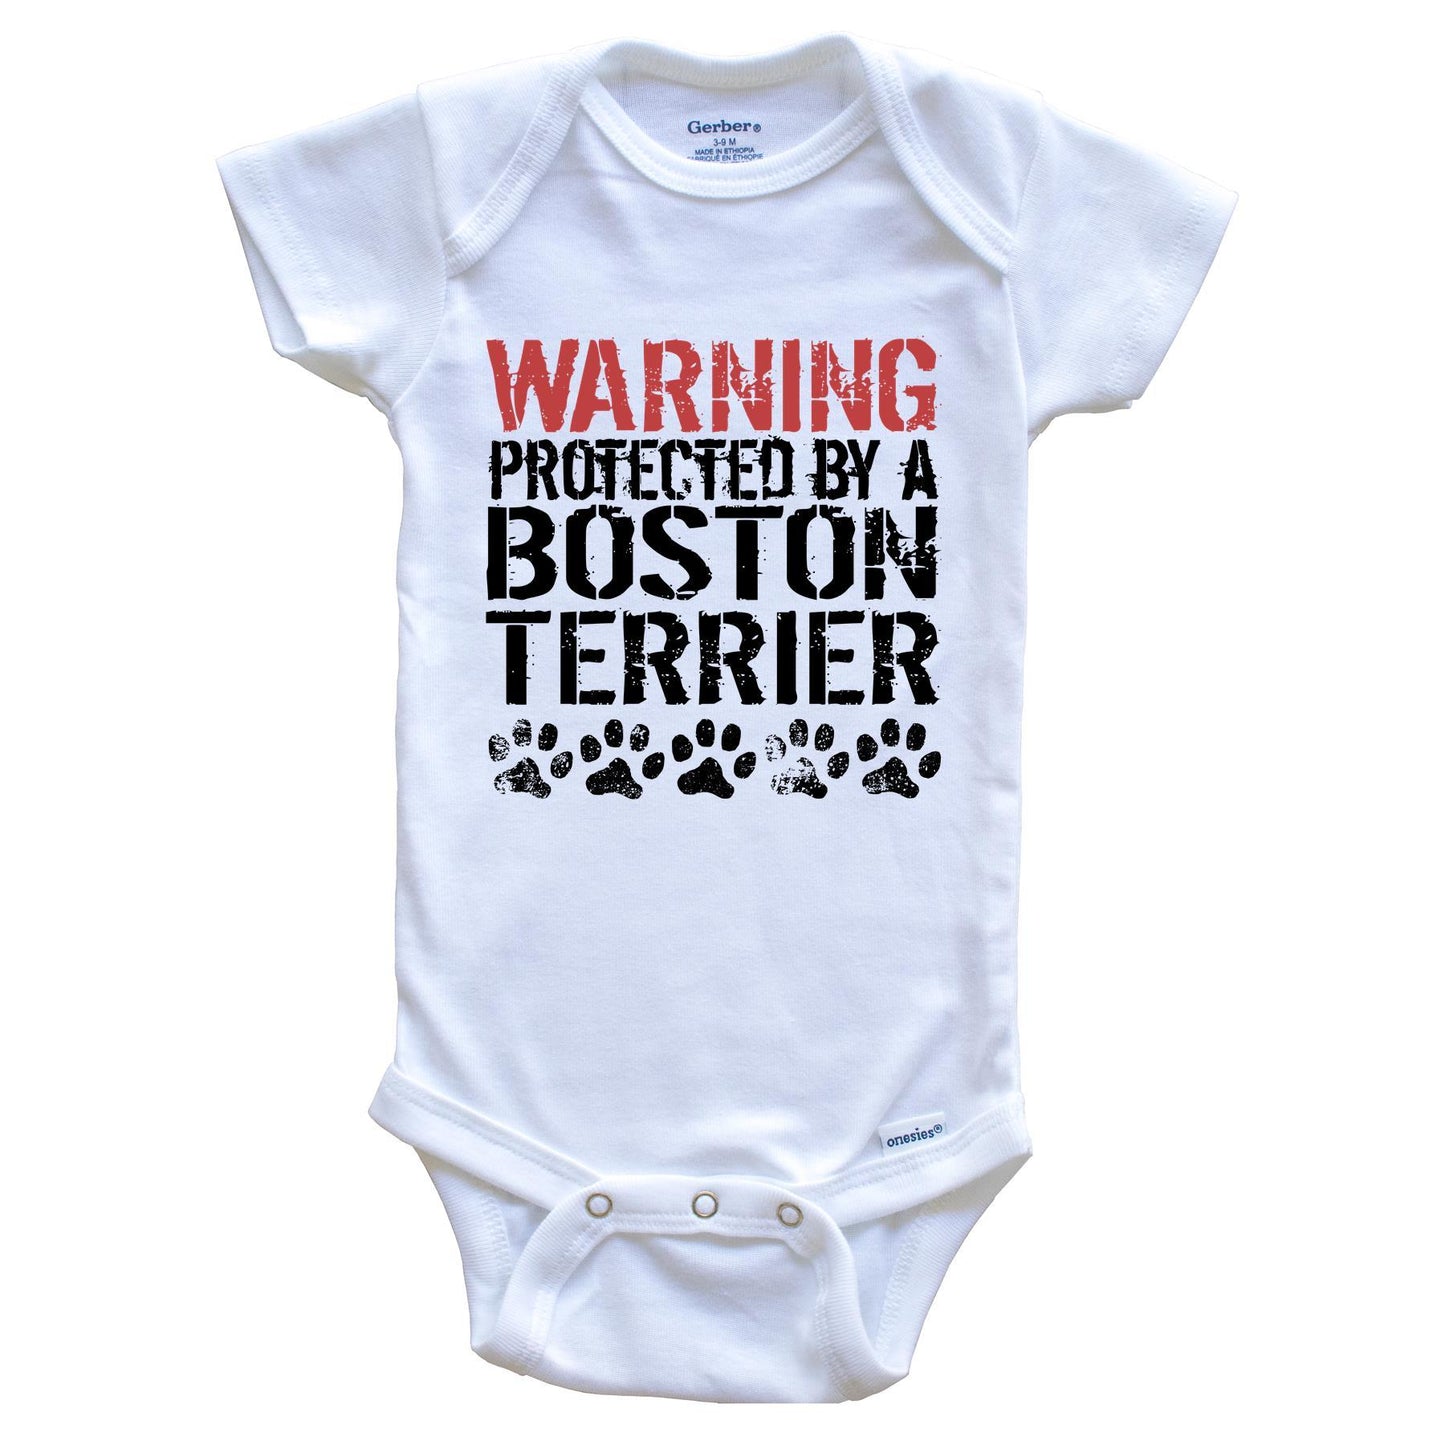 Warning Protected By A Boston Terrier Baby Onesie